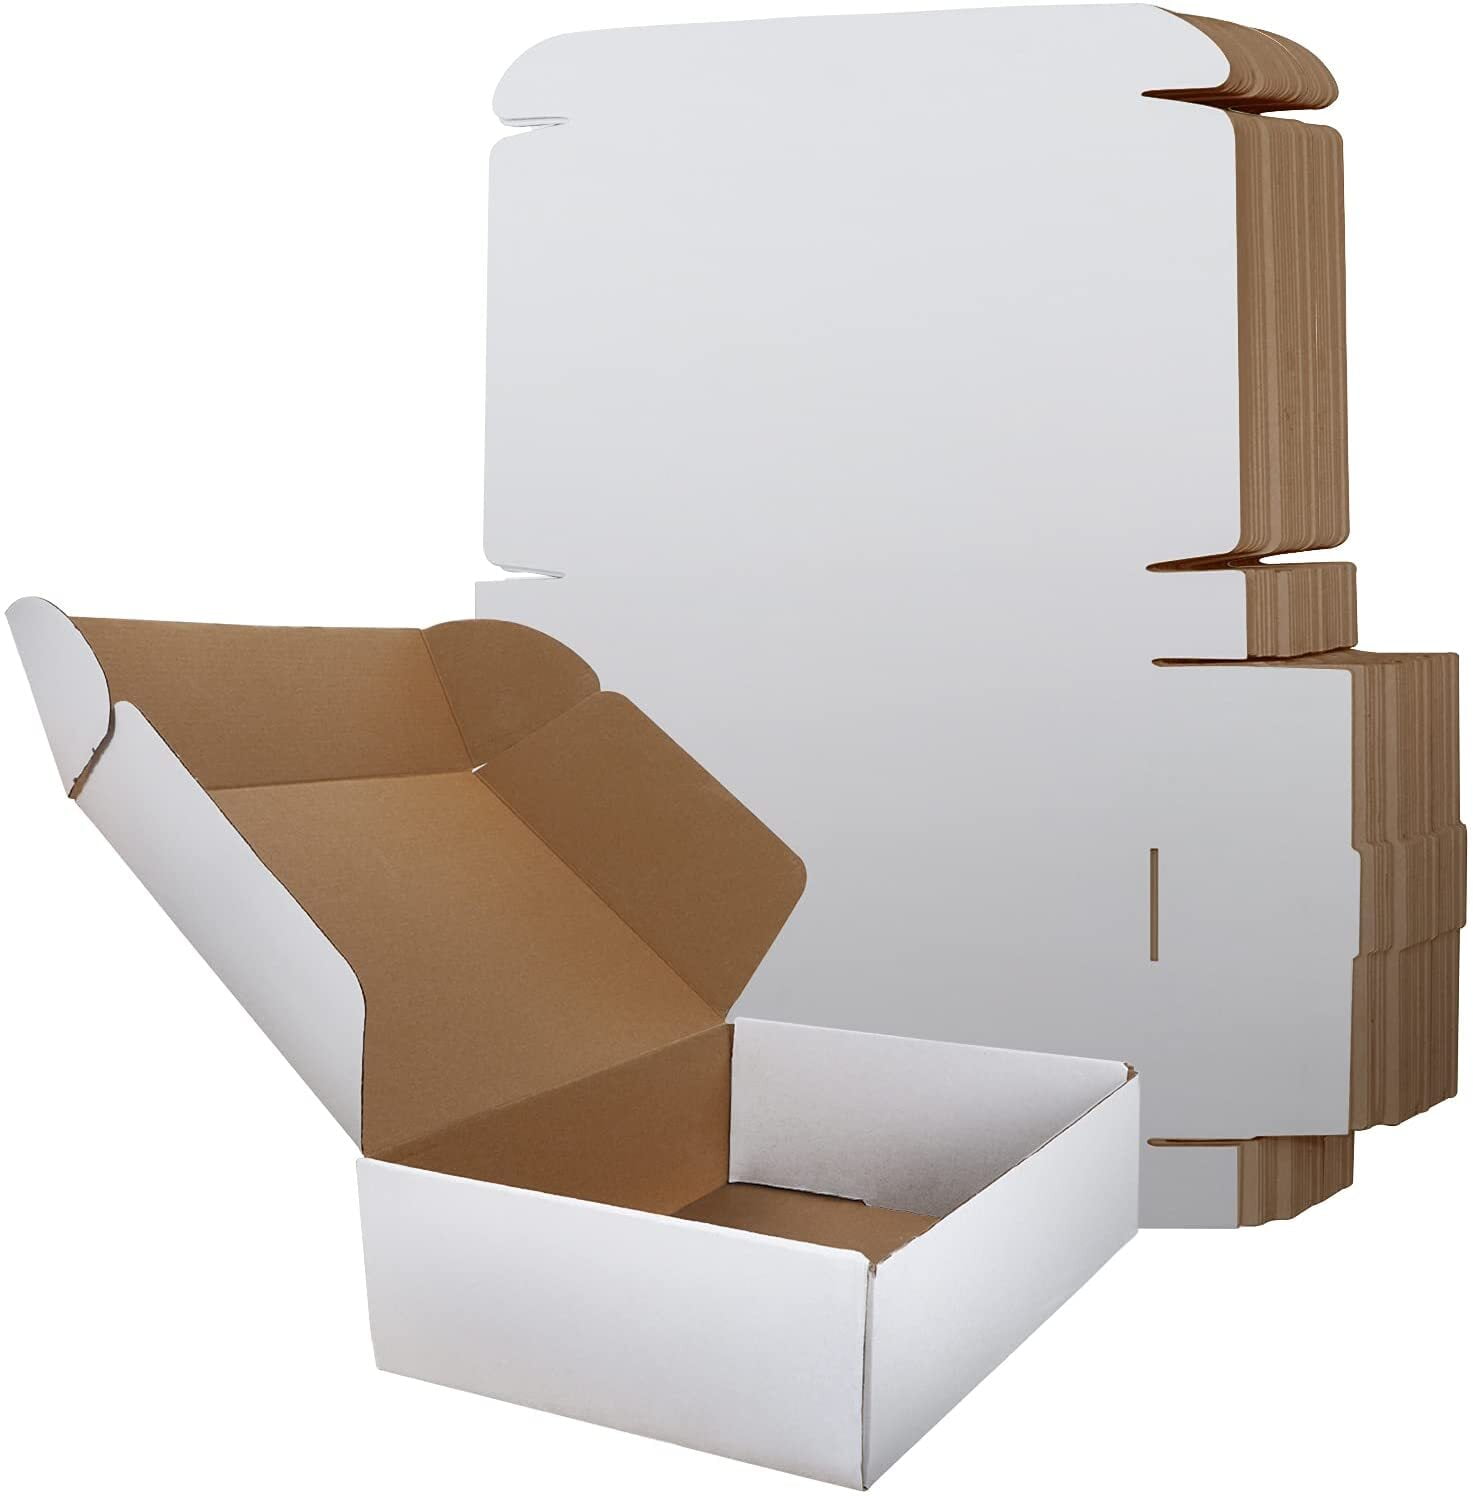 40 EcoSwift 8x6x5 Corrugated Cardboard Packing Boxes Mailing Moving Shipping Box Cartons 8 x 6 x 5 inches 